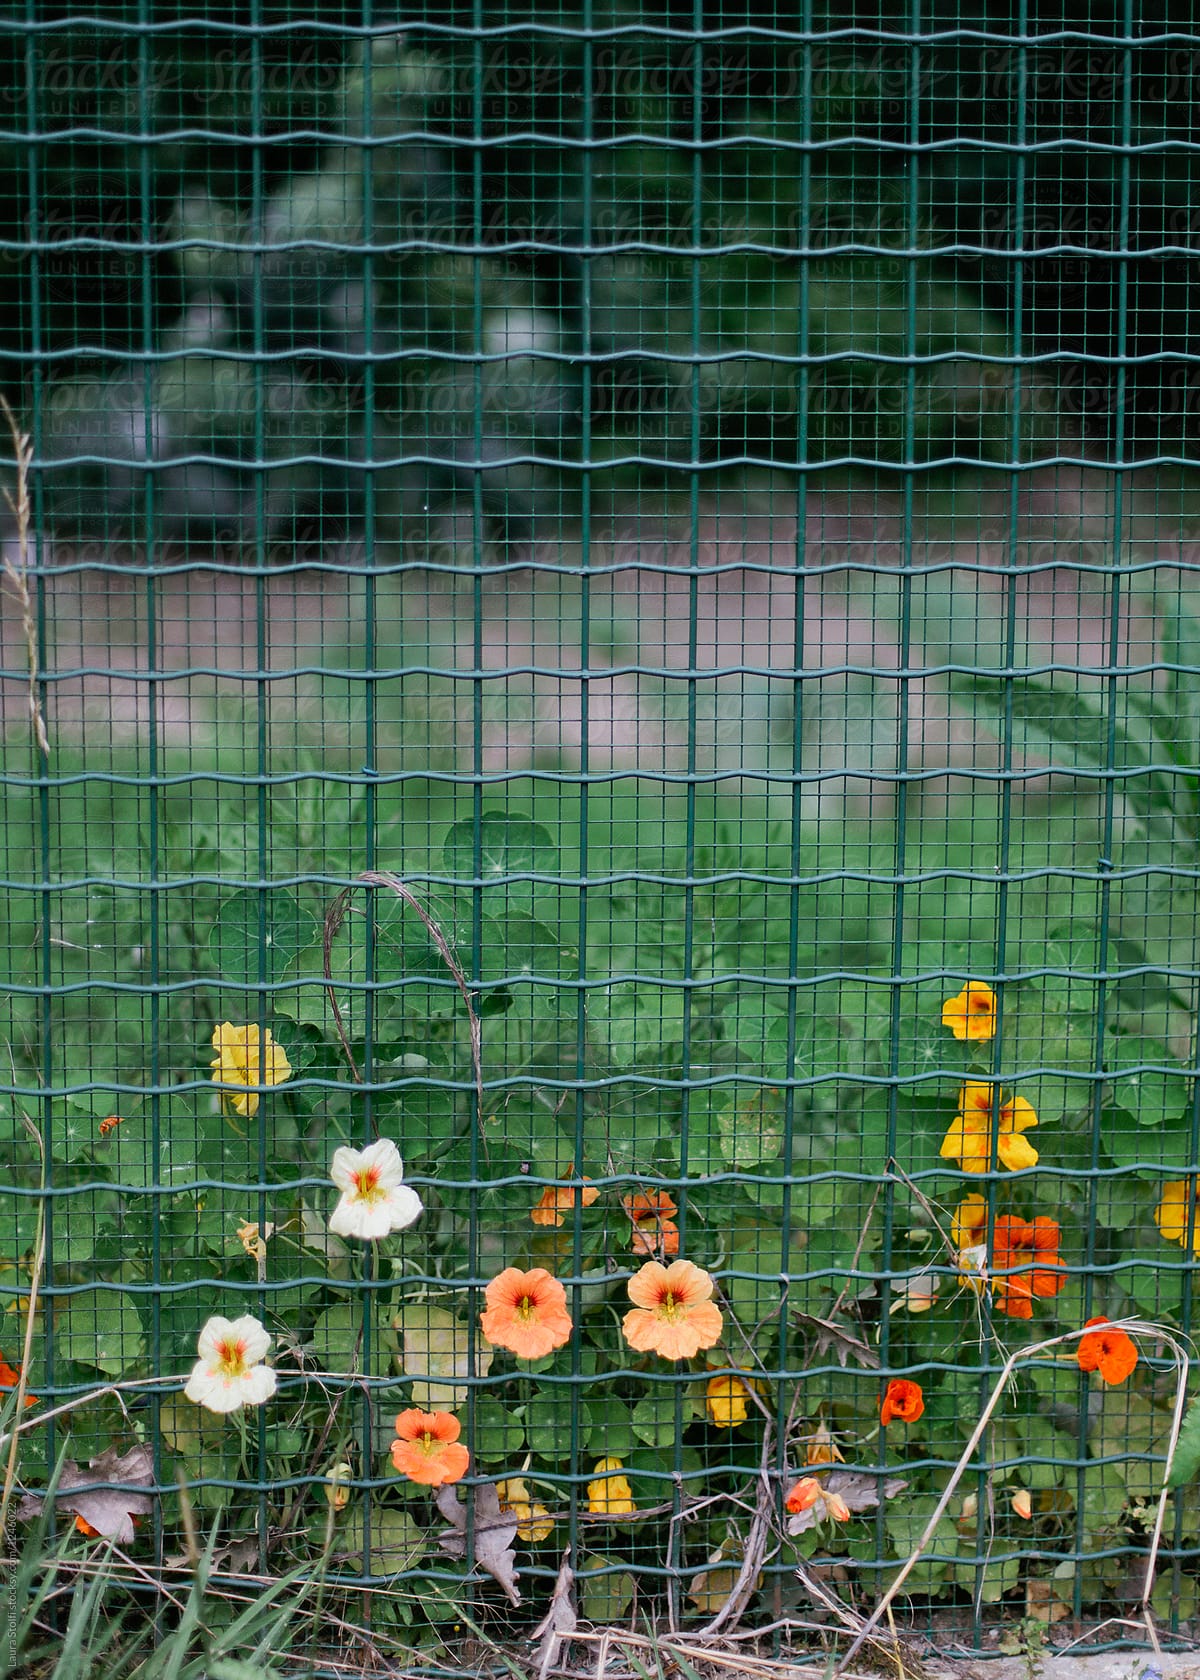 Colorful nasturtiums growing amongst fence in garden